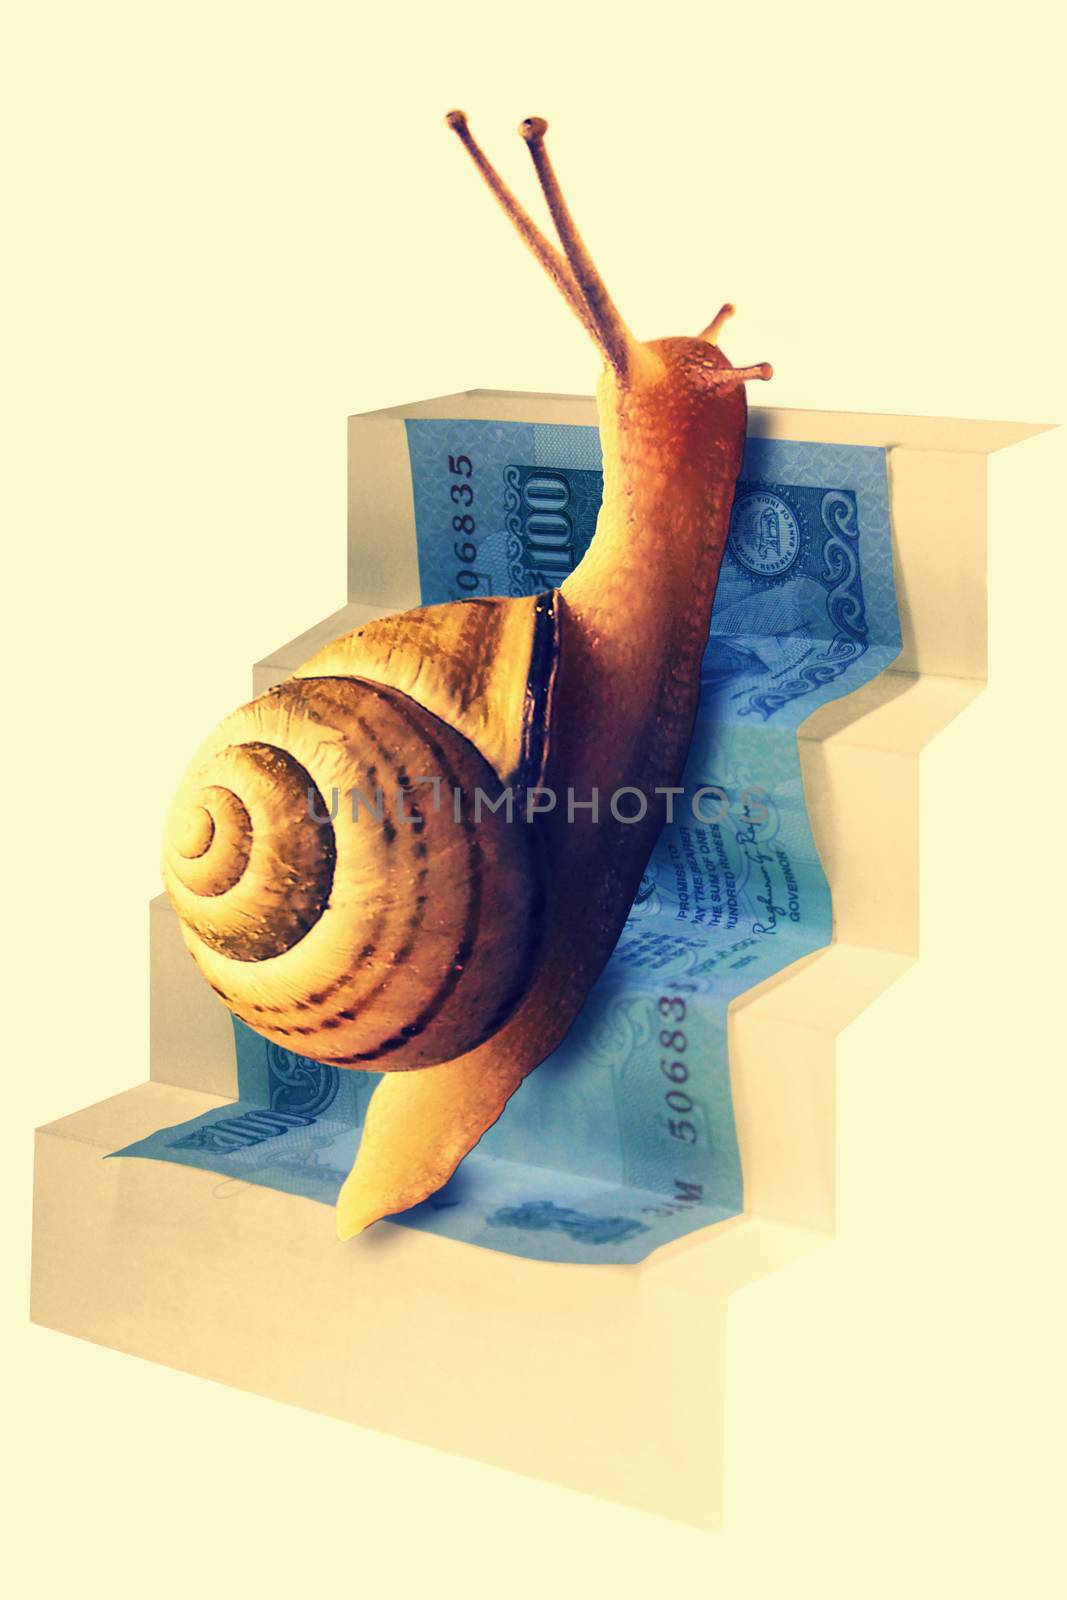 Snail on Staircase by yands